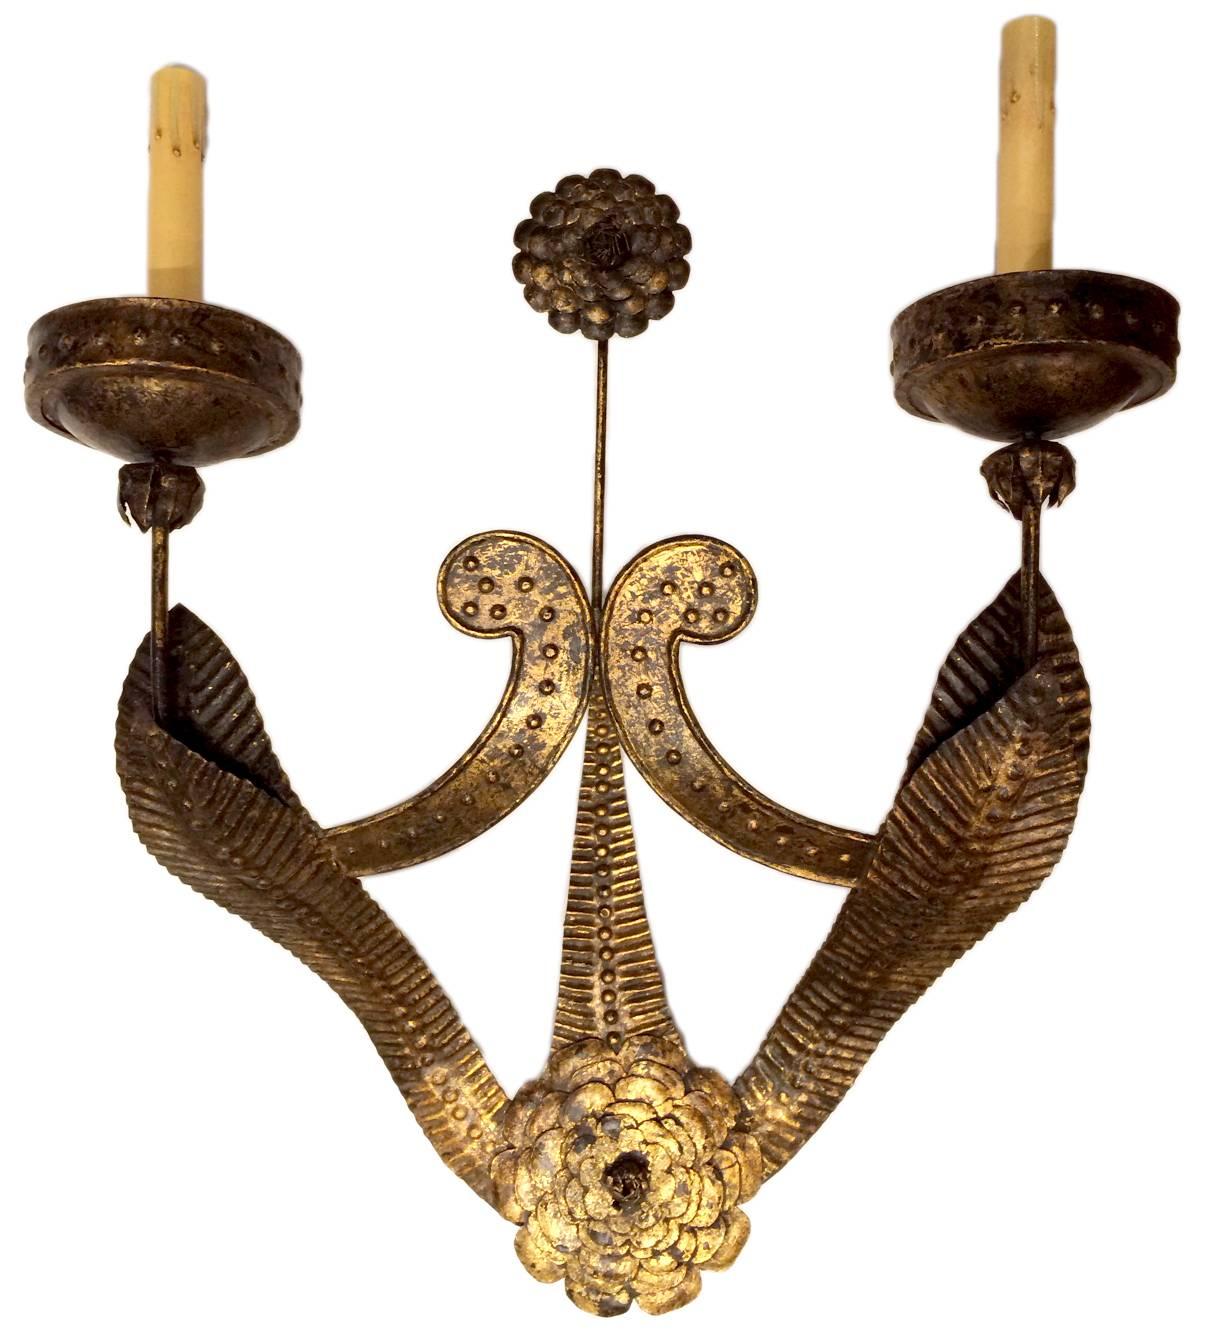 A pair of circa 1940s Italian gilt iron double light sconces with flower detail.

Measurements:
Height 22